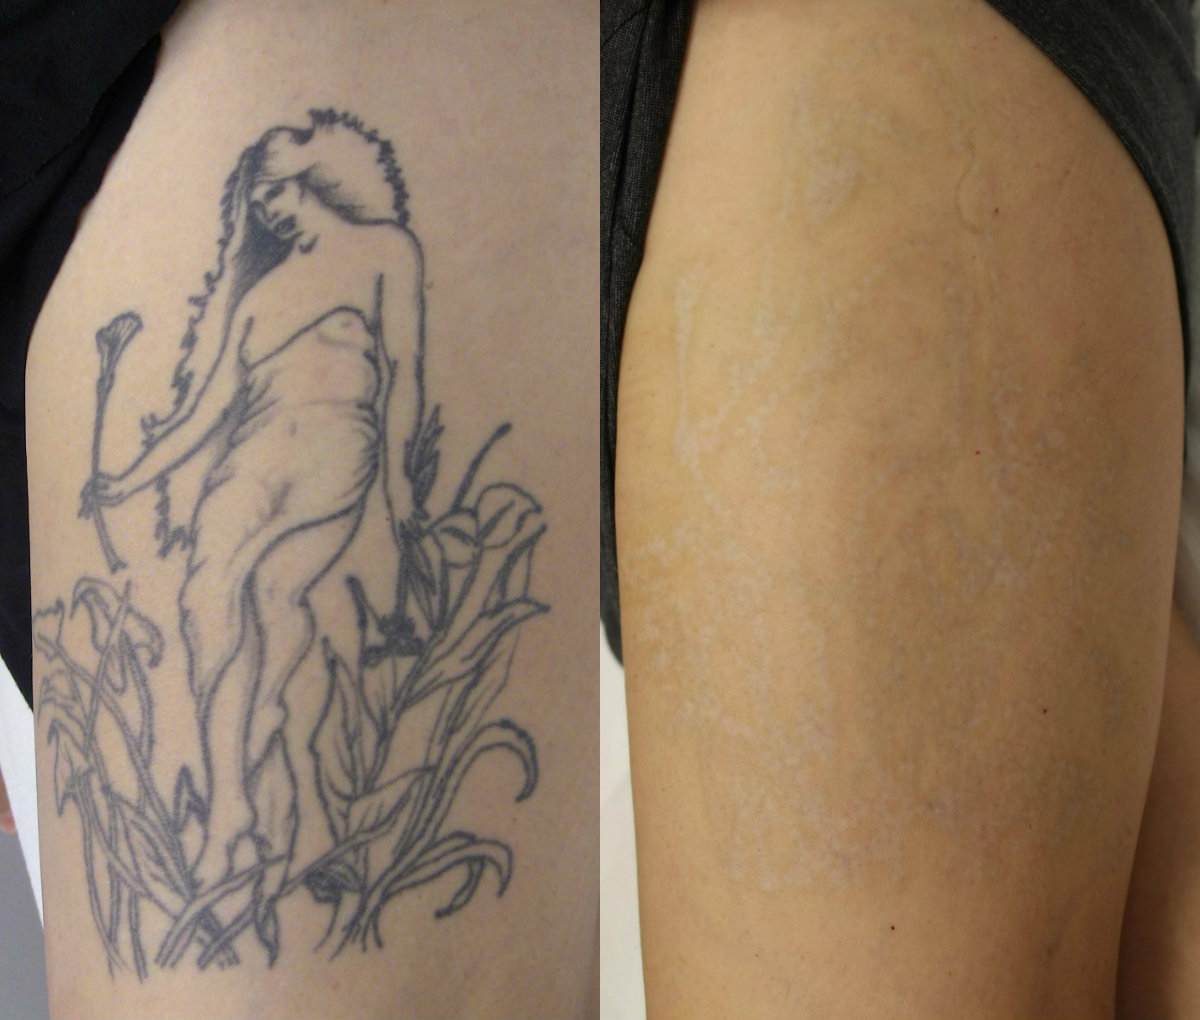 Natural Tattoo Removal: Dermabrasion Tattoo Removal - The Fact